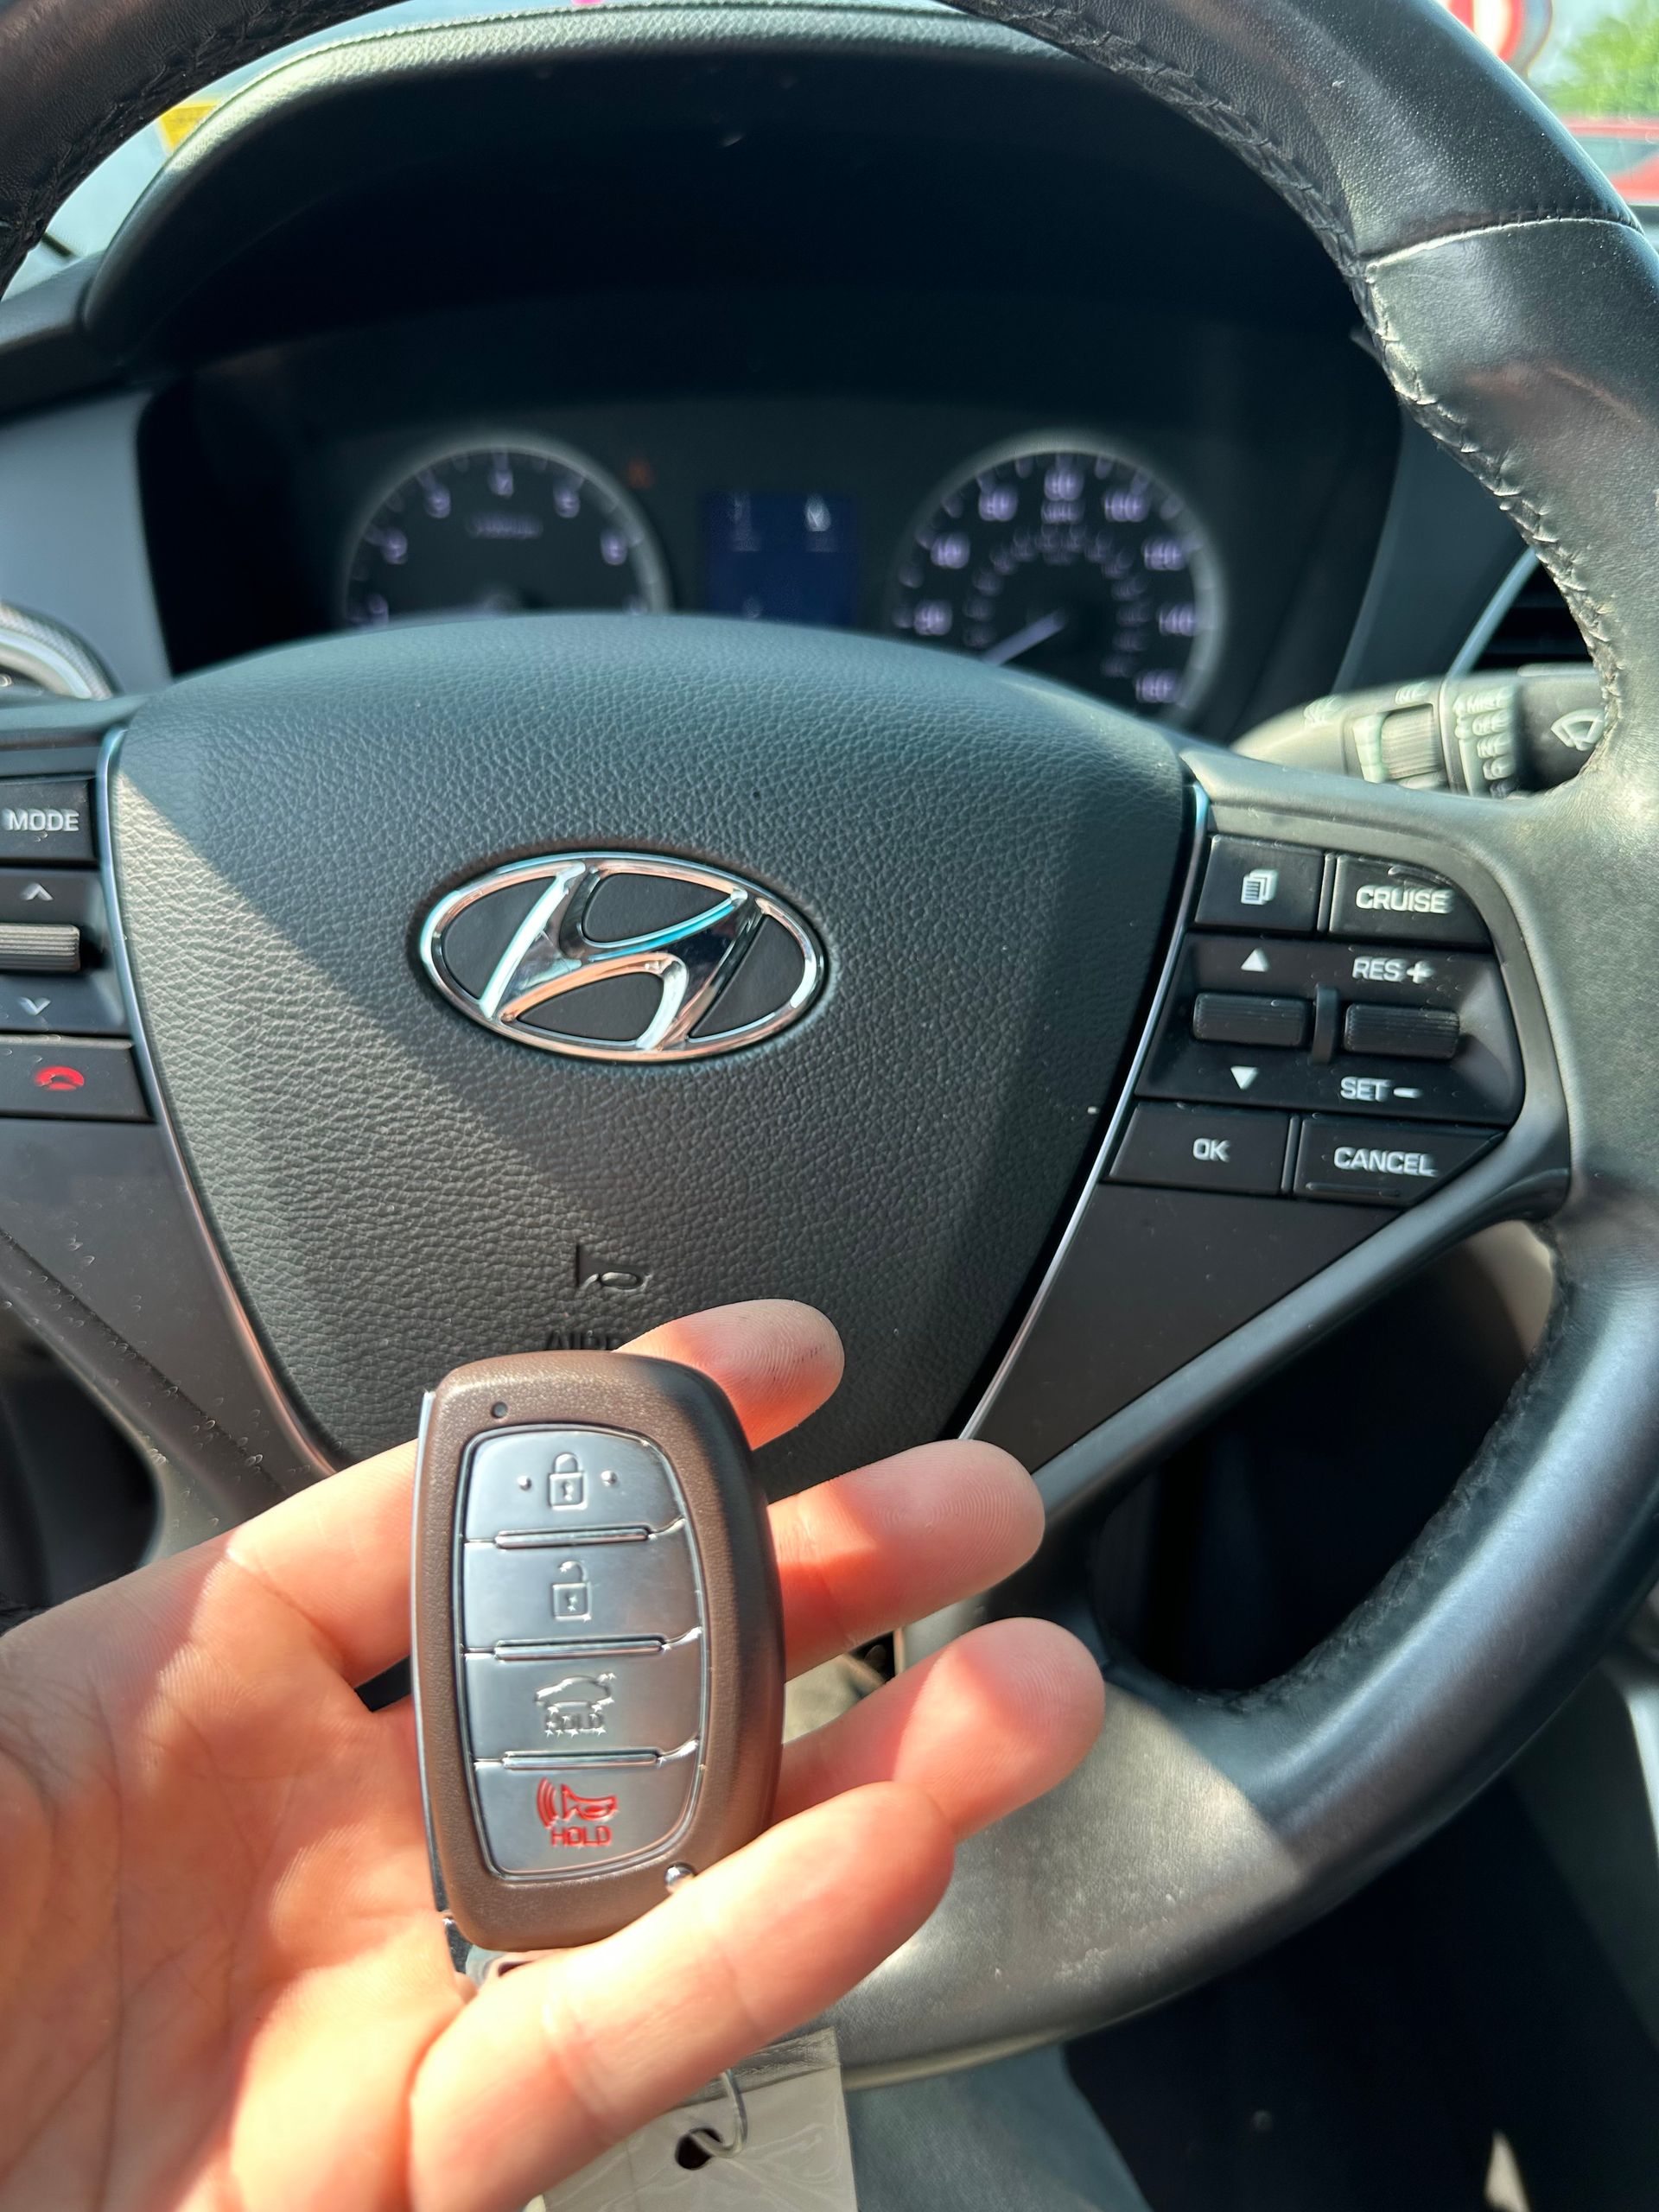 a hand holding a Hyundai vehicle remote in front of a steering wheel